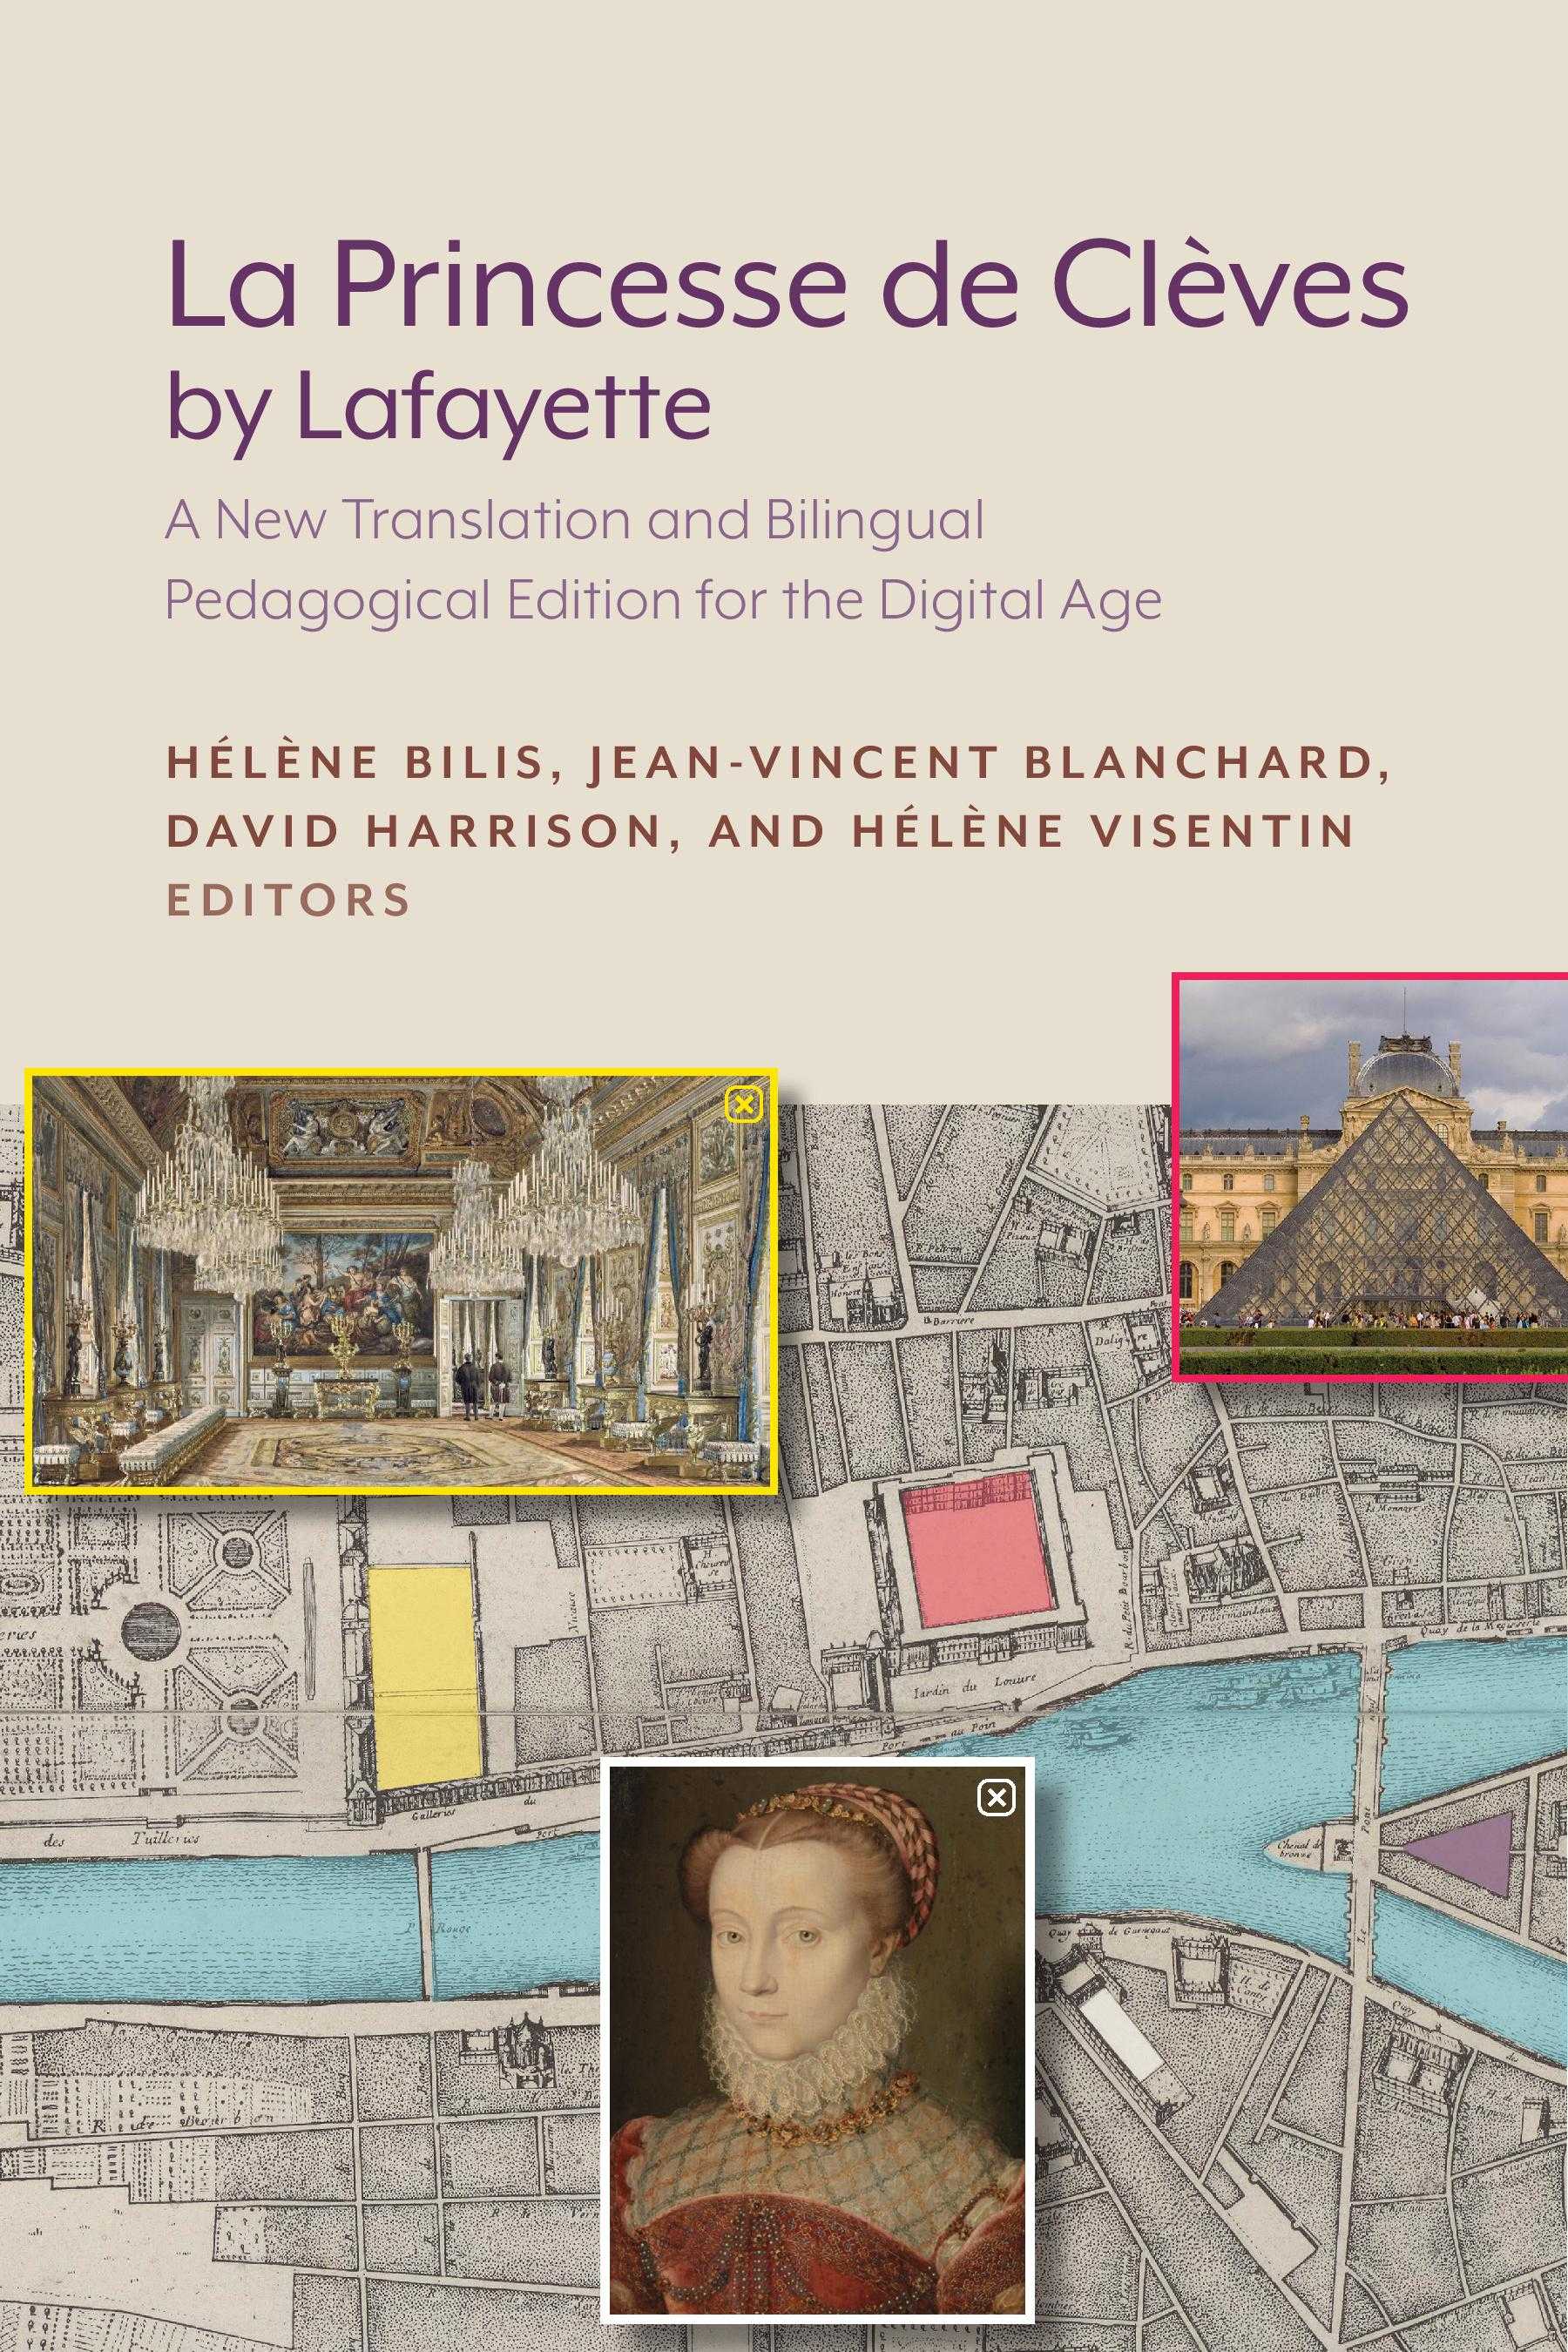 Cover for "La Princesse de Clèves by Lafayette: A New Translation and Bilingual Pedagogical Edition for the Digital Age," featuring a map of Paris, portrait of the author, image of a palace ballroom, and a picture of the Louvre.